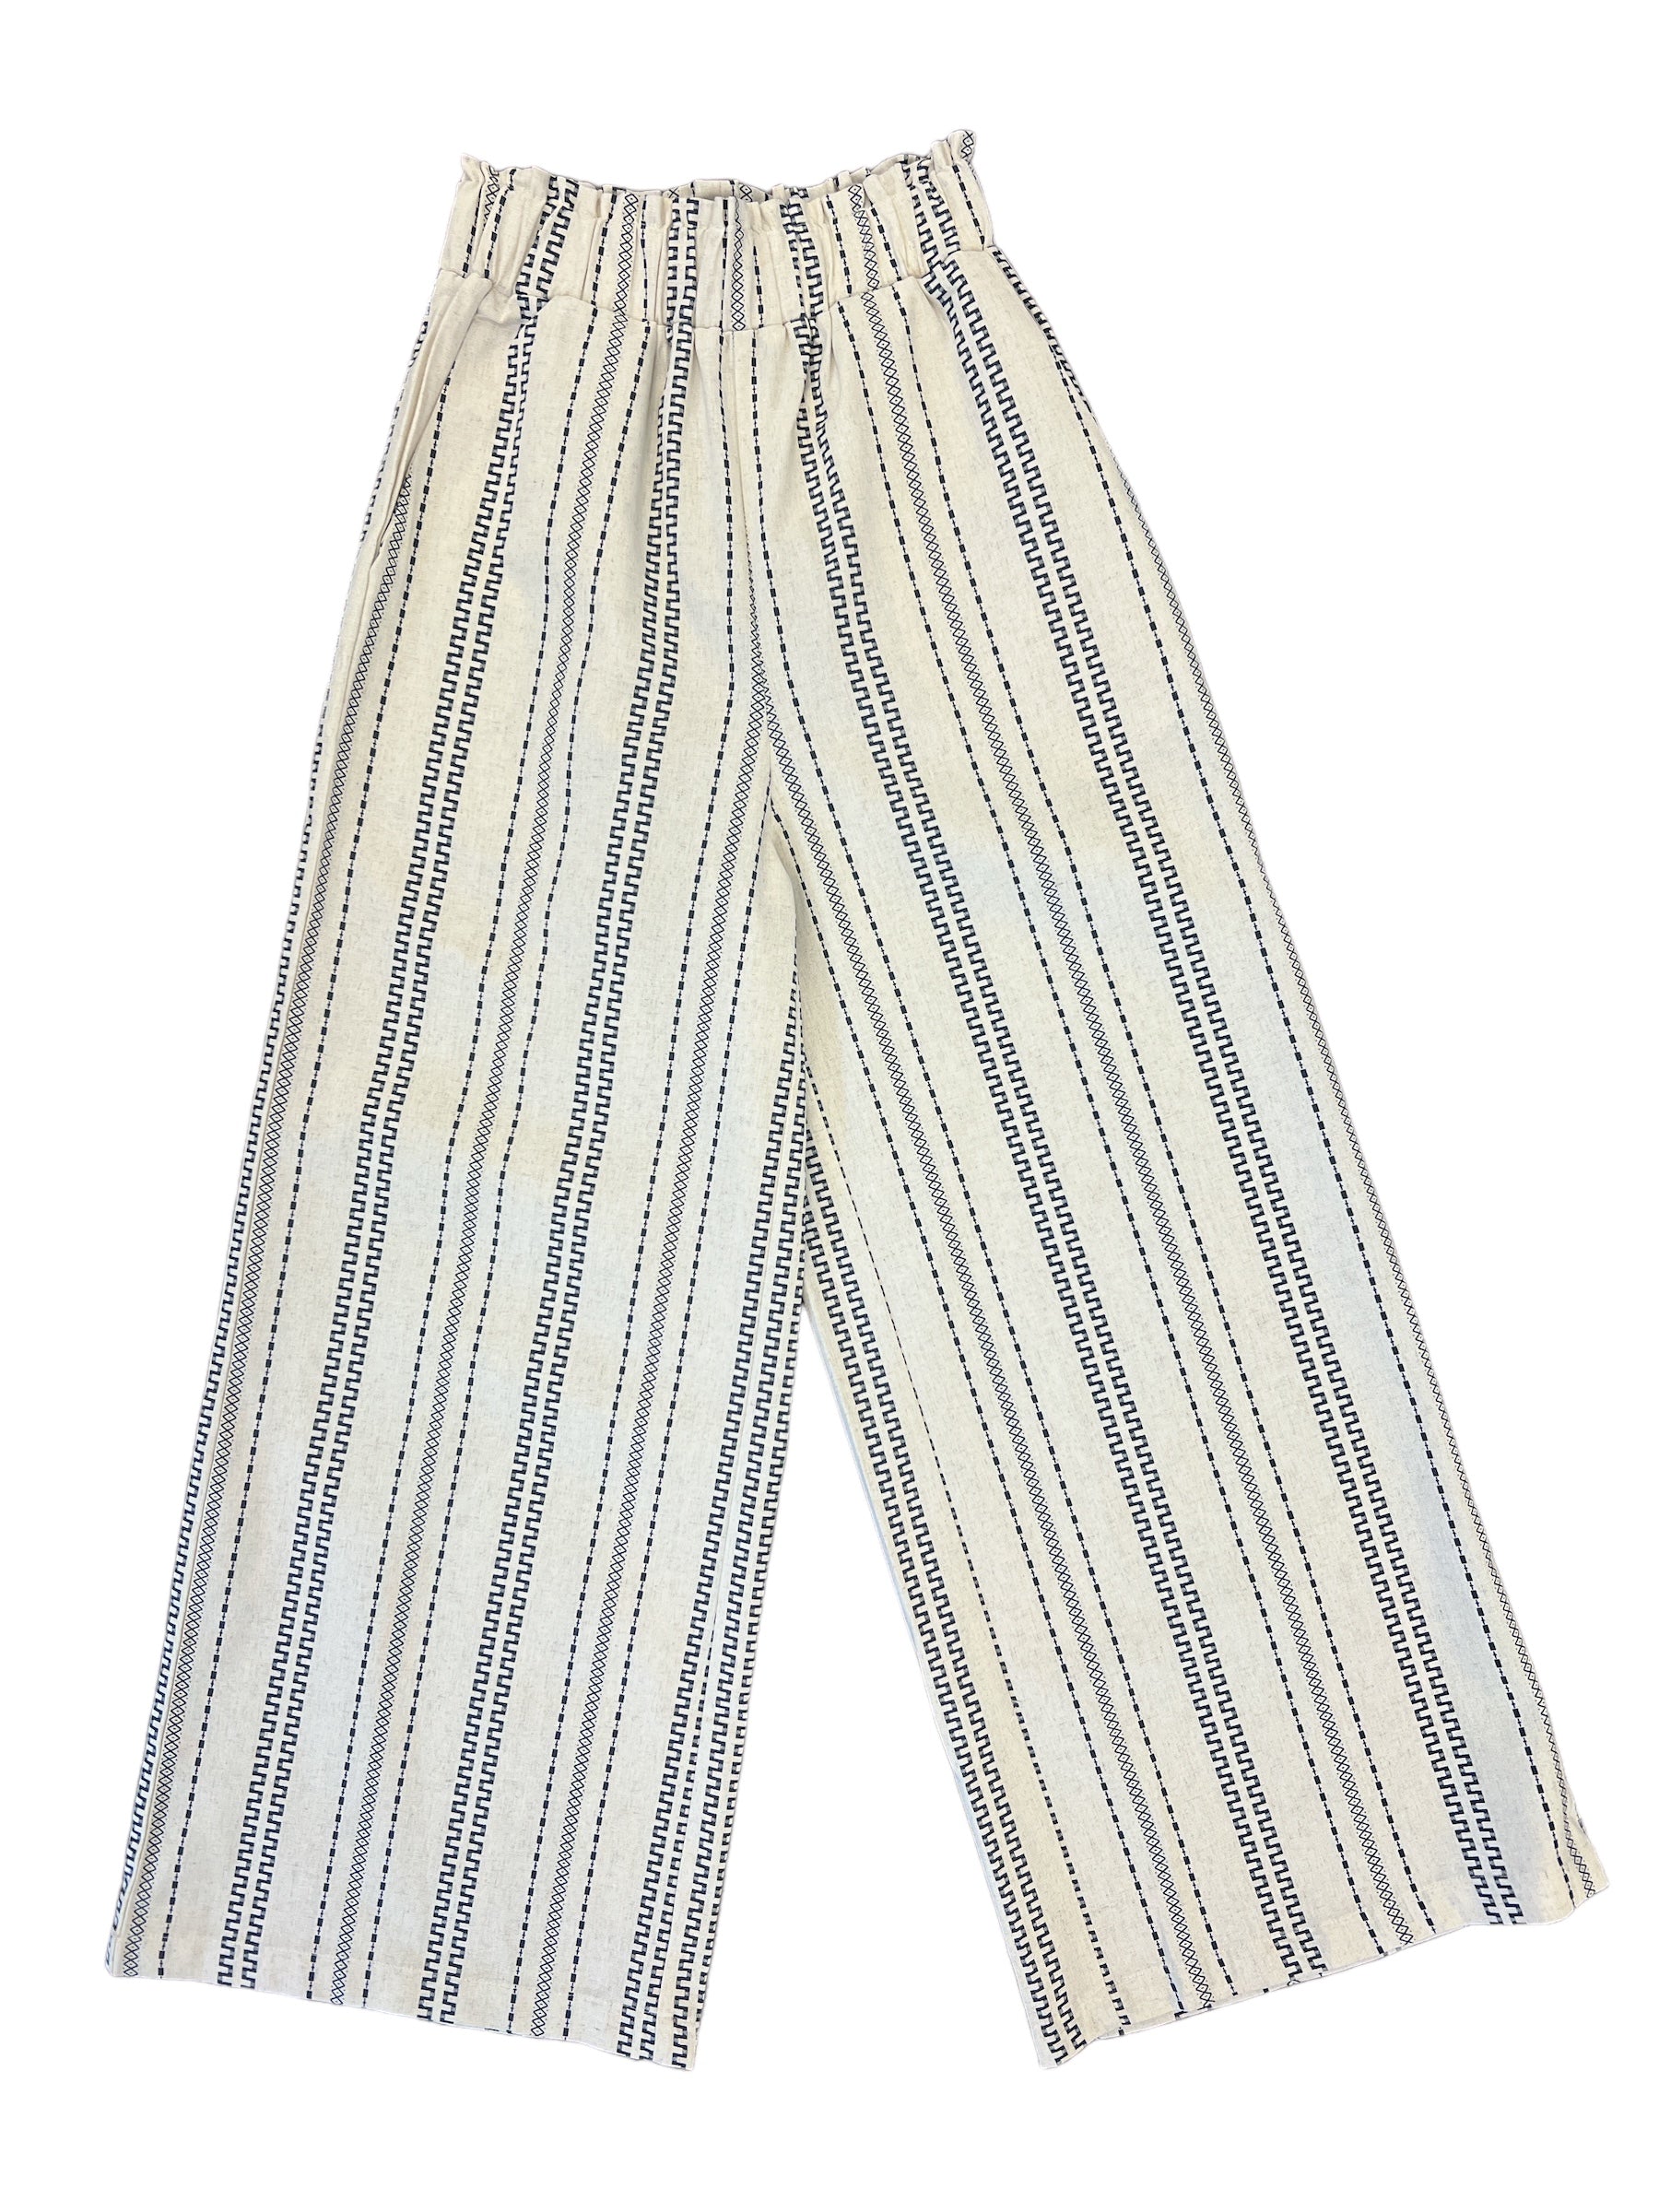 Celine Pants-230 Pants-Before You Collection-Simply Stylish Boutique | Women’s & Kid’s Fashion | Paducah, KY